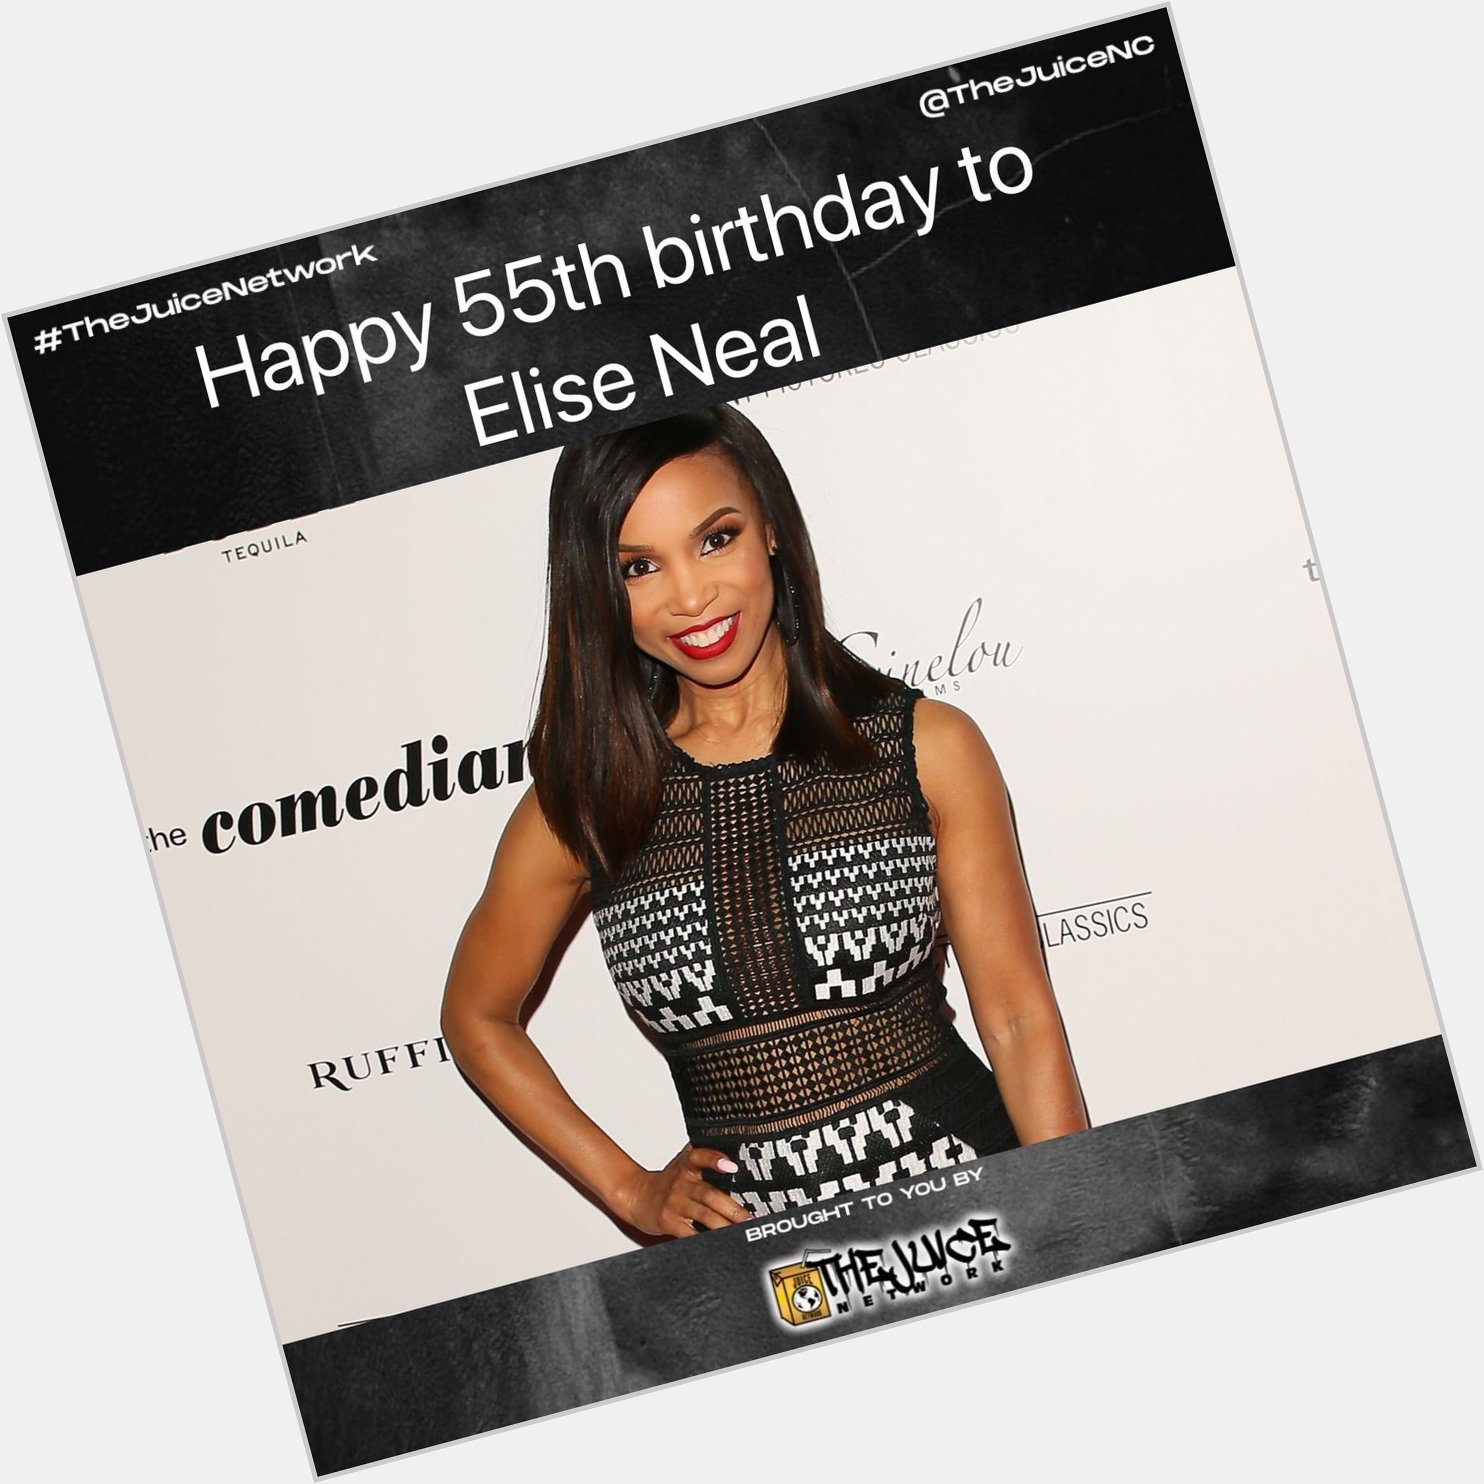 Happy 55th birthday to Elise Neal!    